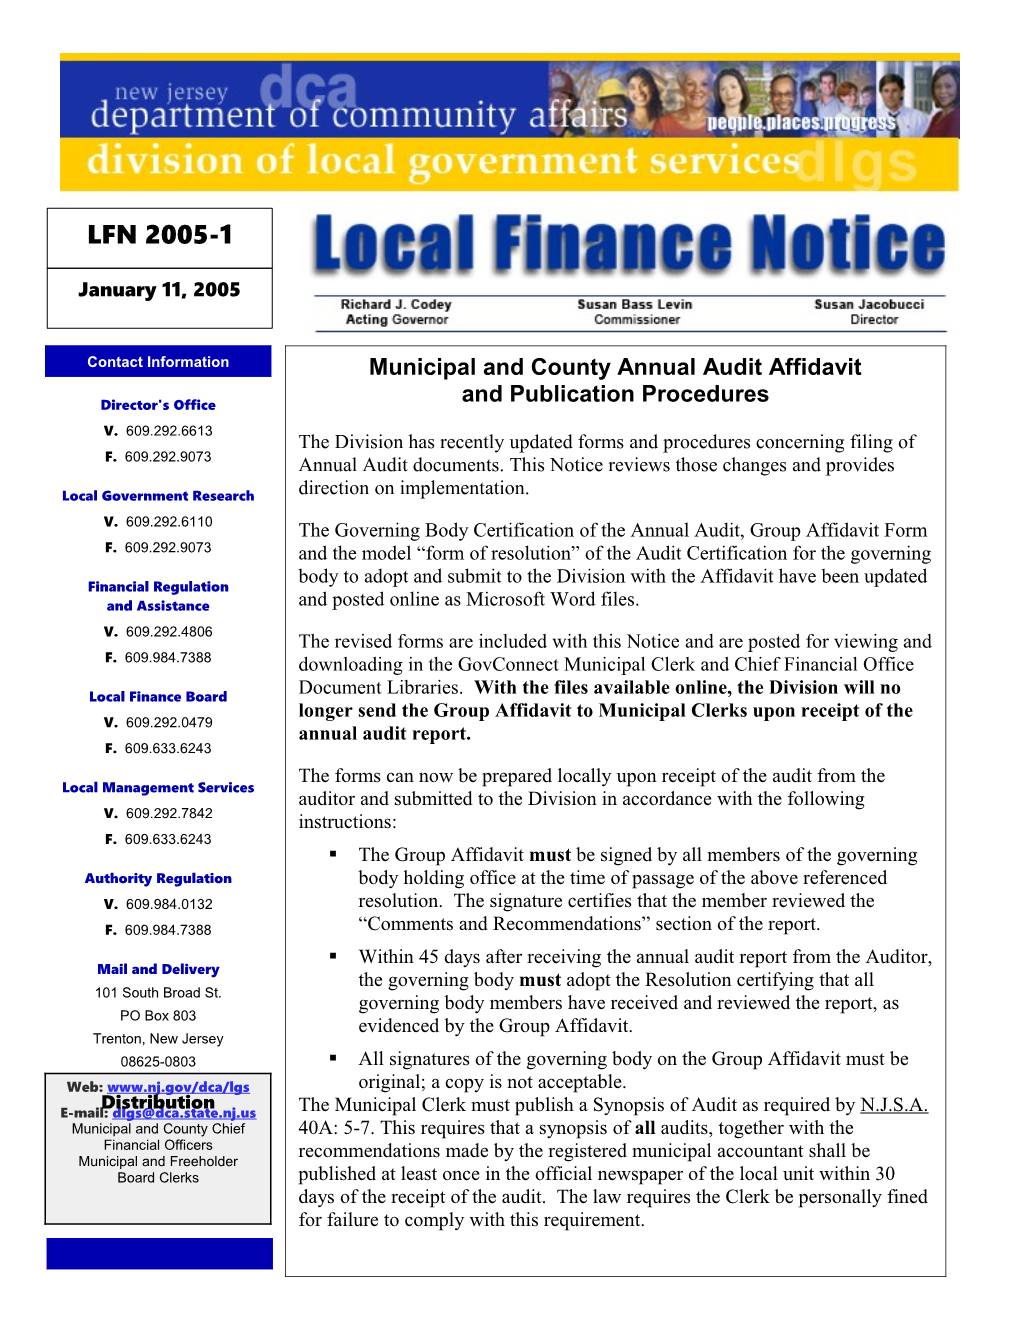 Local Finance Notice 2005-1January 11, 2005Page # 2